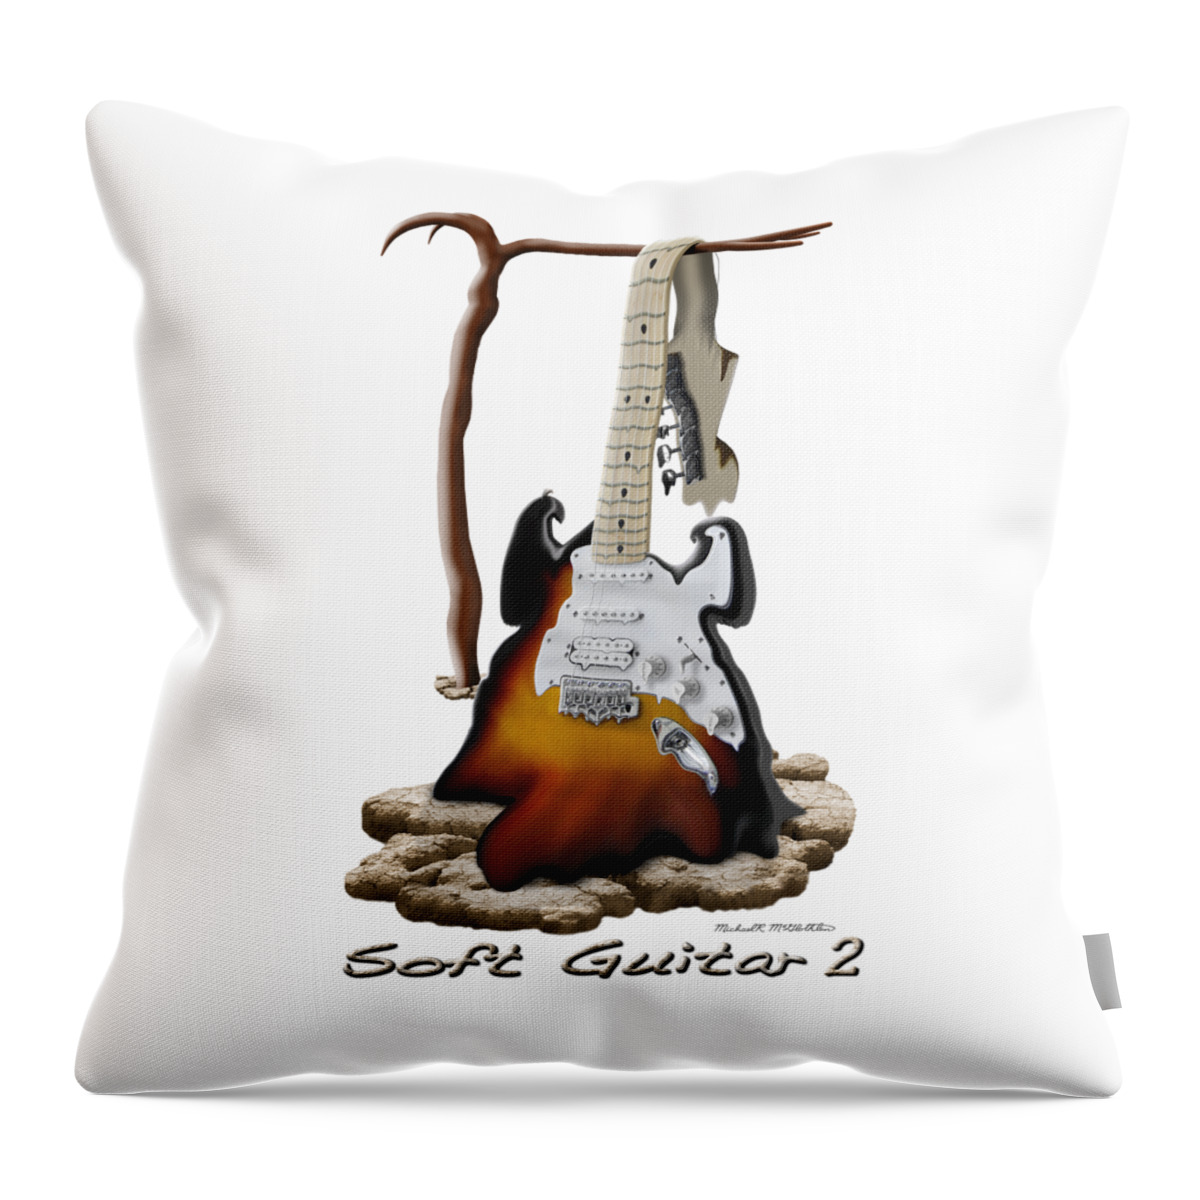 Rock And Roll Throw Pillow featuring the photograph Soft Guitar 2 by Mike McGlothlen